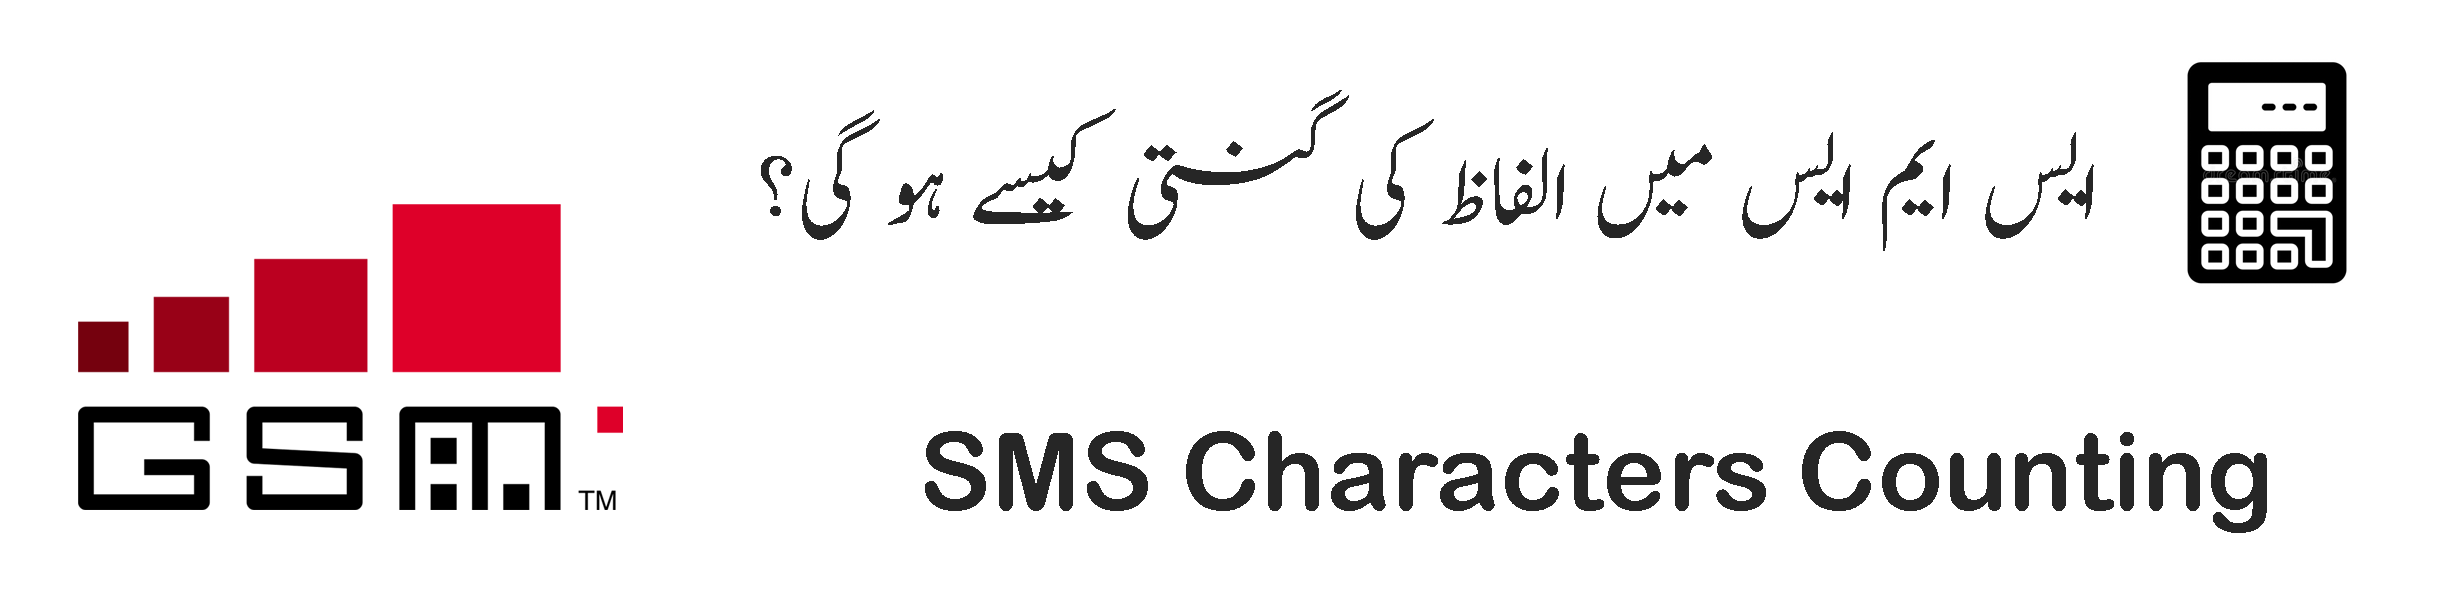 sms-characters-counting